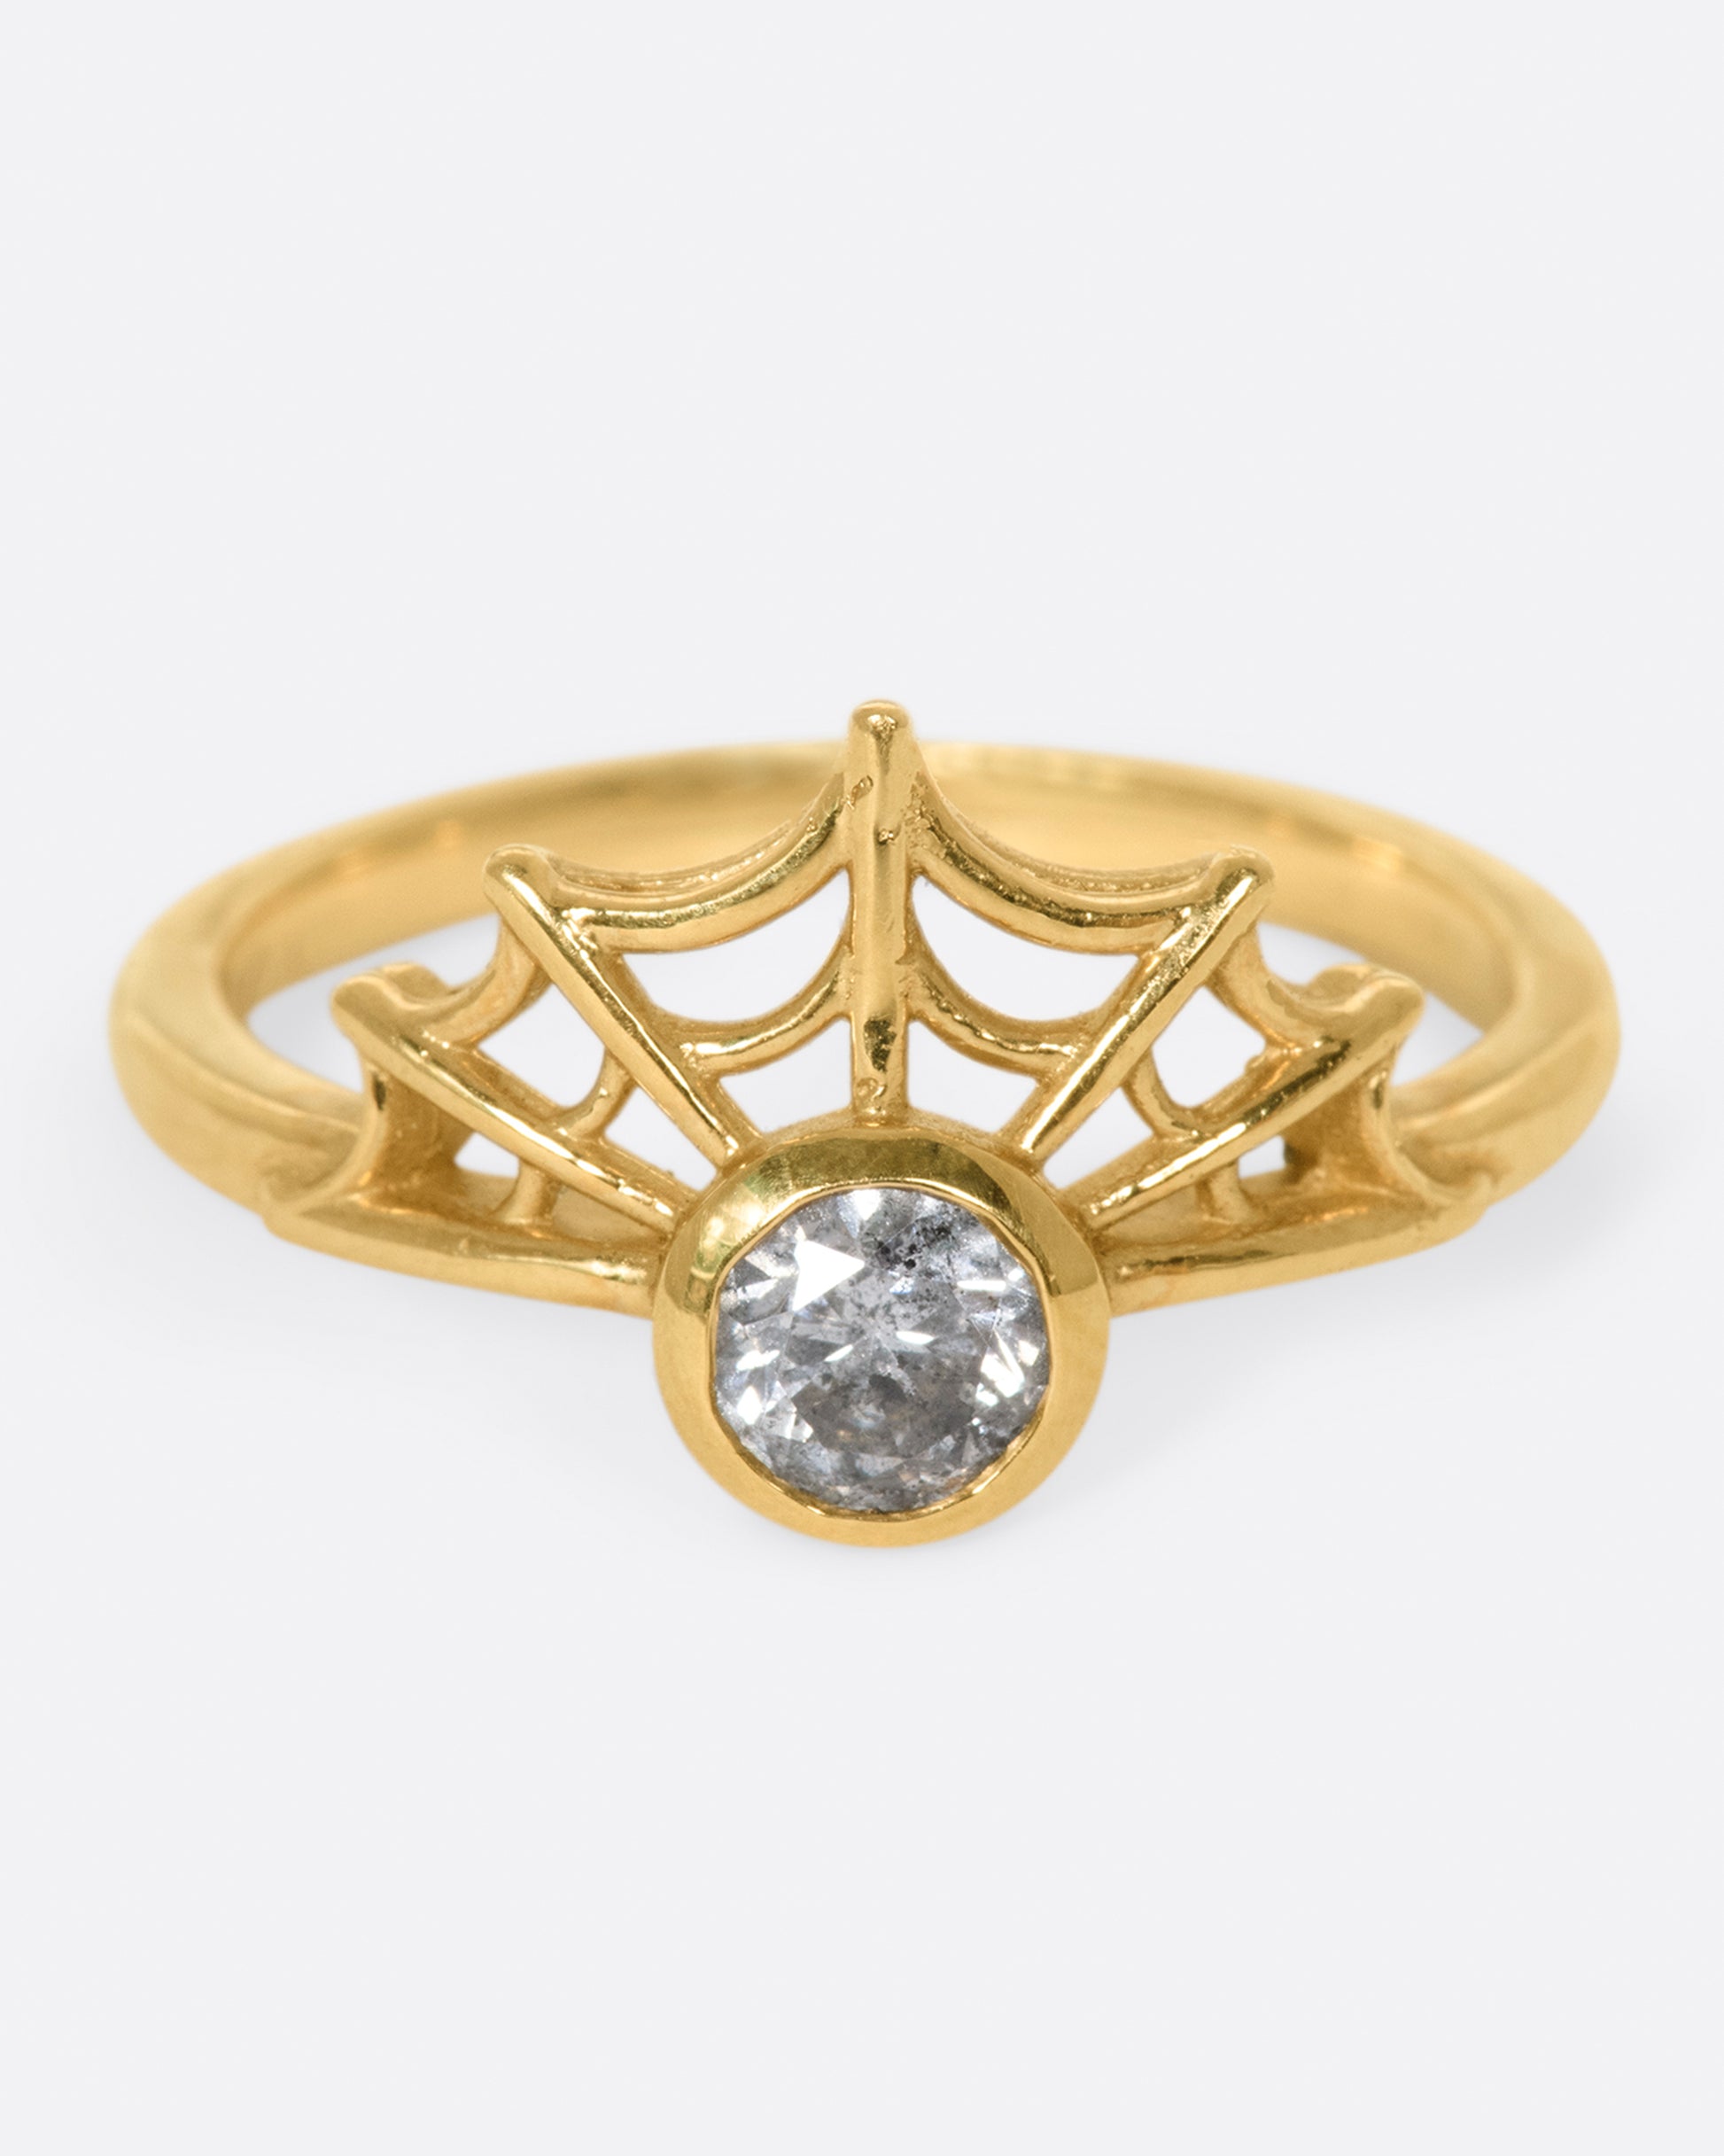 in a yellow gold witchy ring, a grey diamond is bezel set in the middle, with an arched spider web on one side of the diamond.